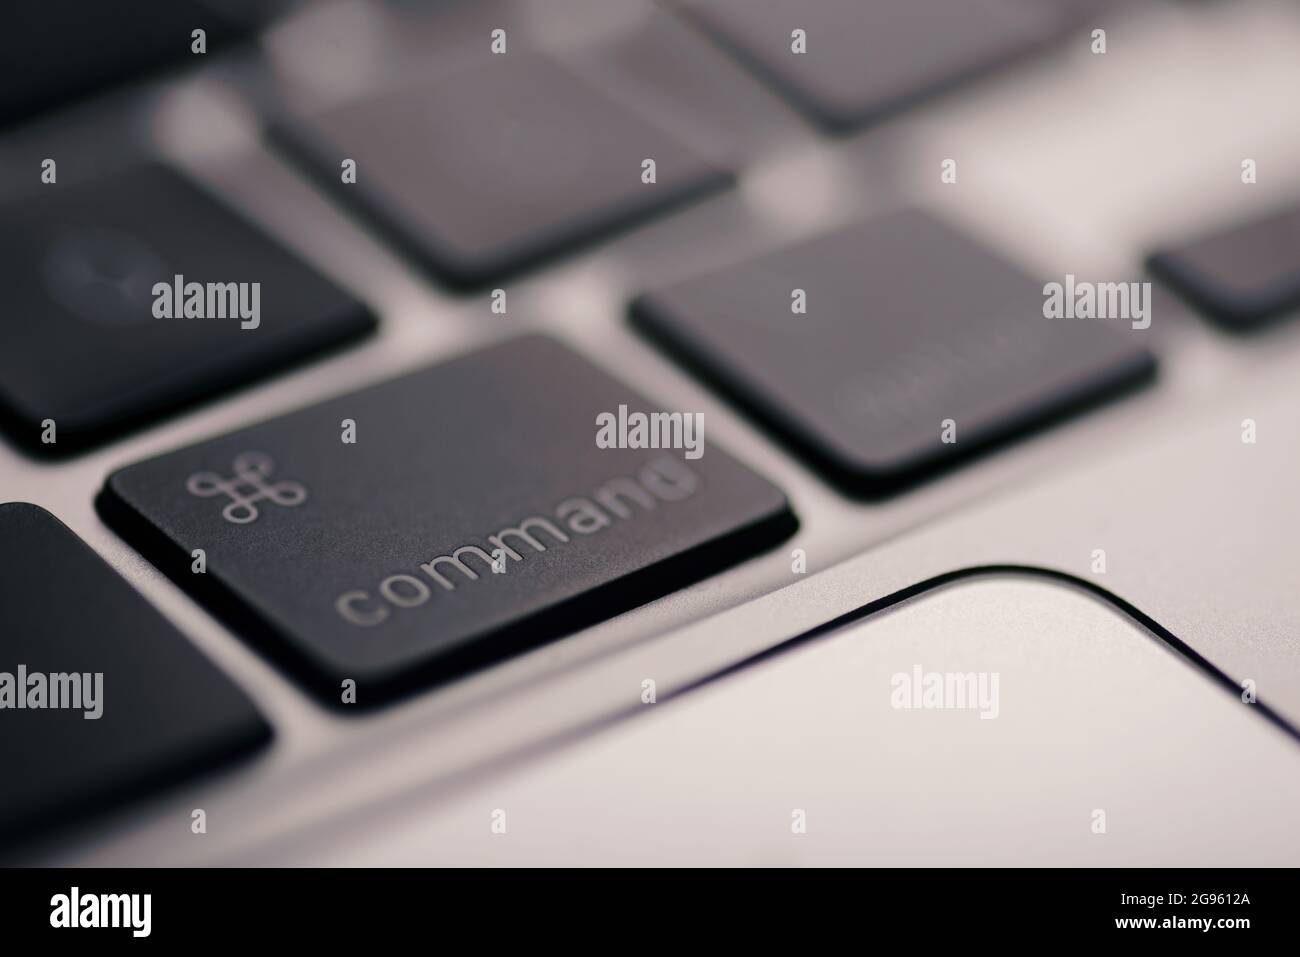 Izmir, Turkey - May 29, 2021: Close up shot of Command button of an apple brand macbook. Stock Photo